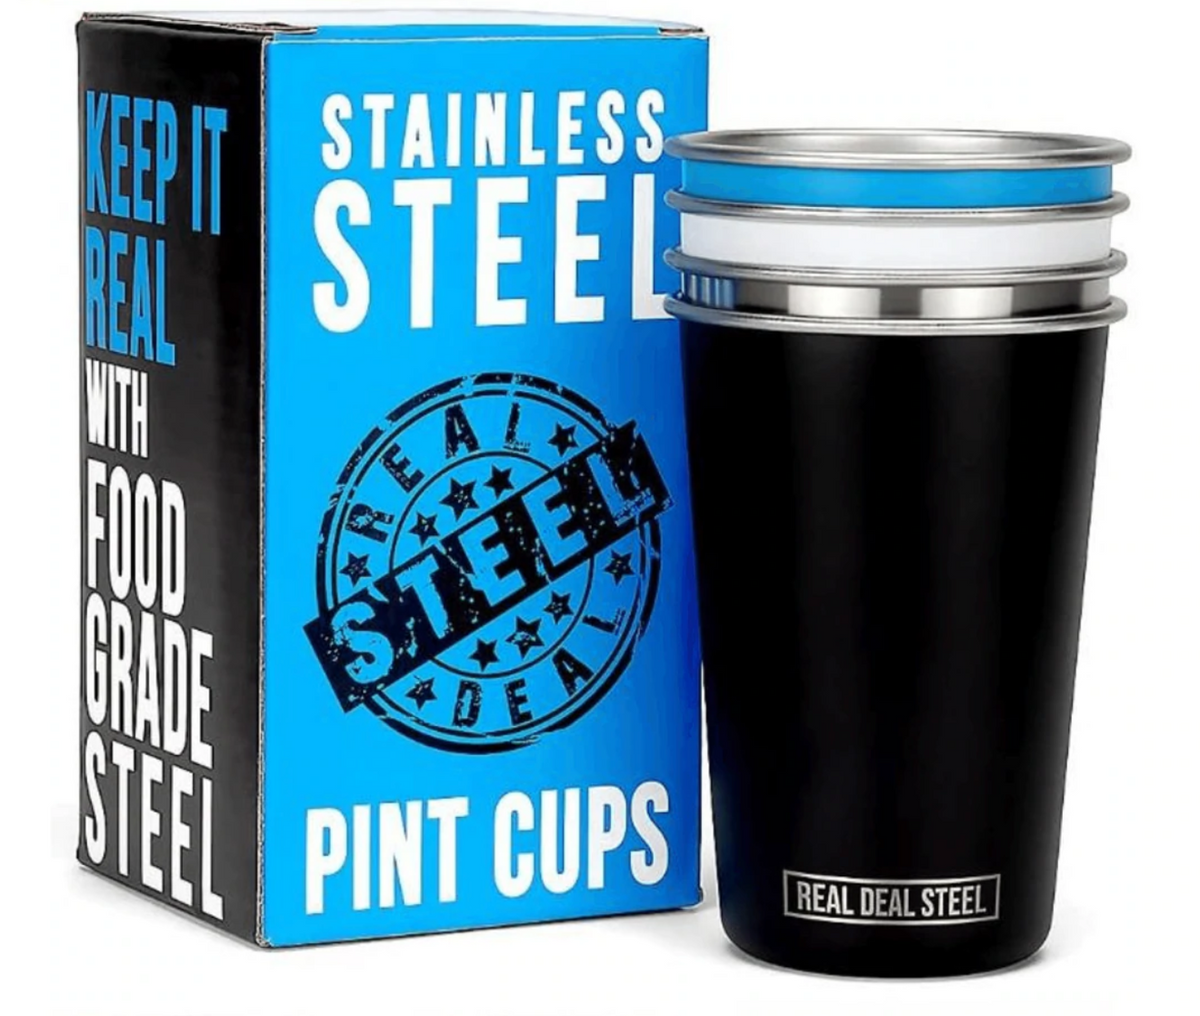 6 Pack 8 Oz Stainless Steel Kids Cups, Children's Pint Cups, Stackable  Durable Metal Cups, Shatterproof Drinking Glasses